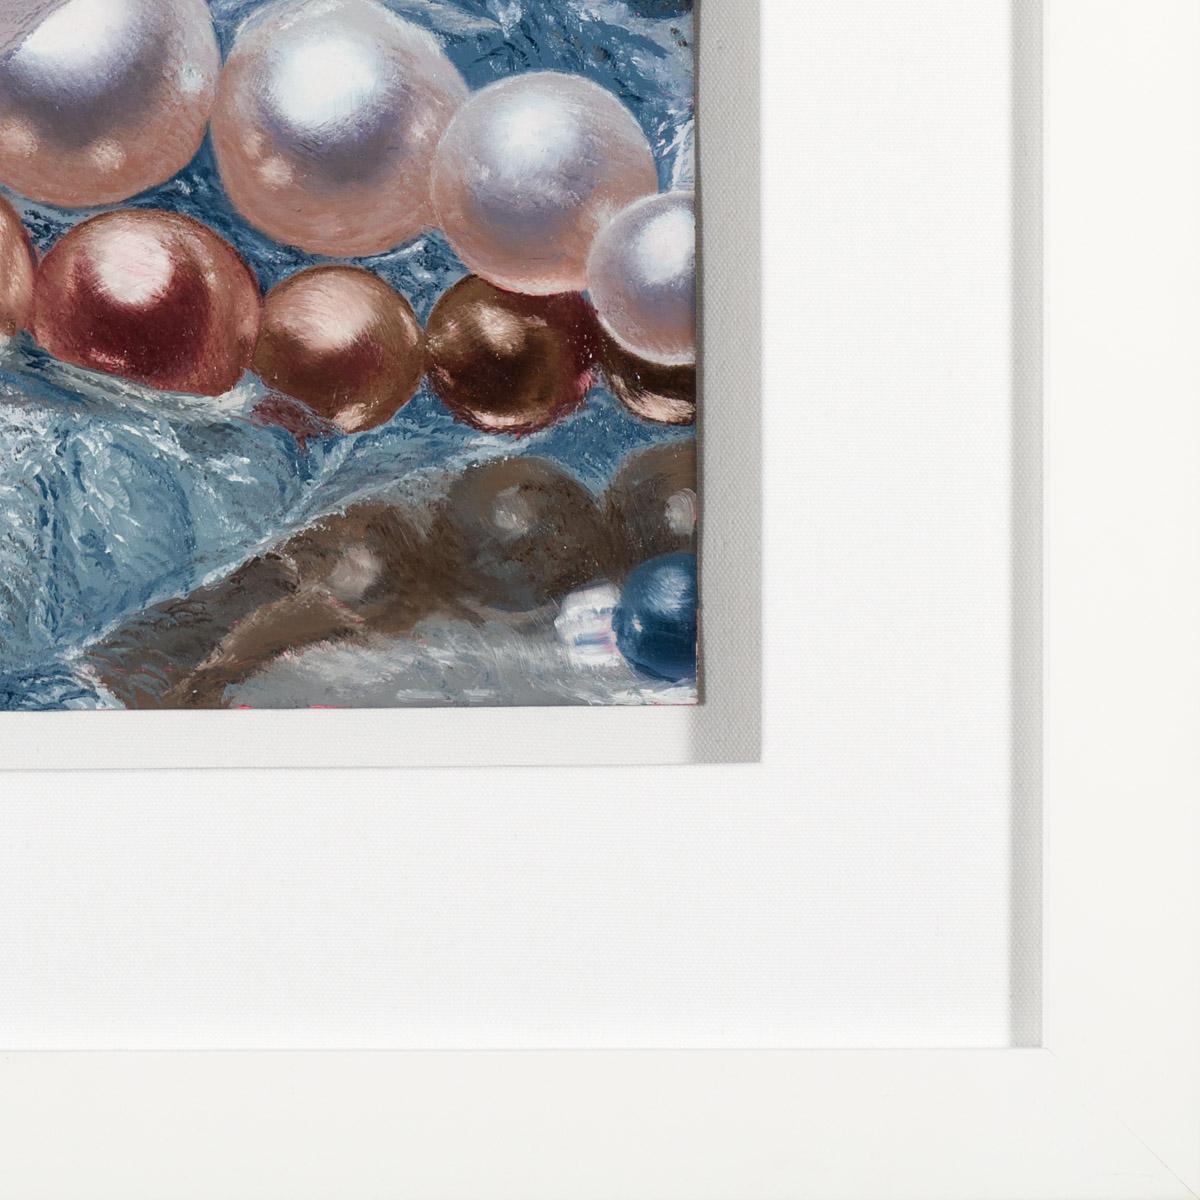 Mirror Pearls is an oil painting on prepared paper, sheet size 12.25 x 16.25 inches, signed, titled and dated verso, 'Ben Weiner Mirror Pearls 2019' and framed in a contemporary white frame.

Connecting two opposing styles—abstraction